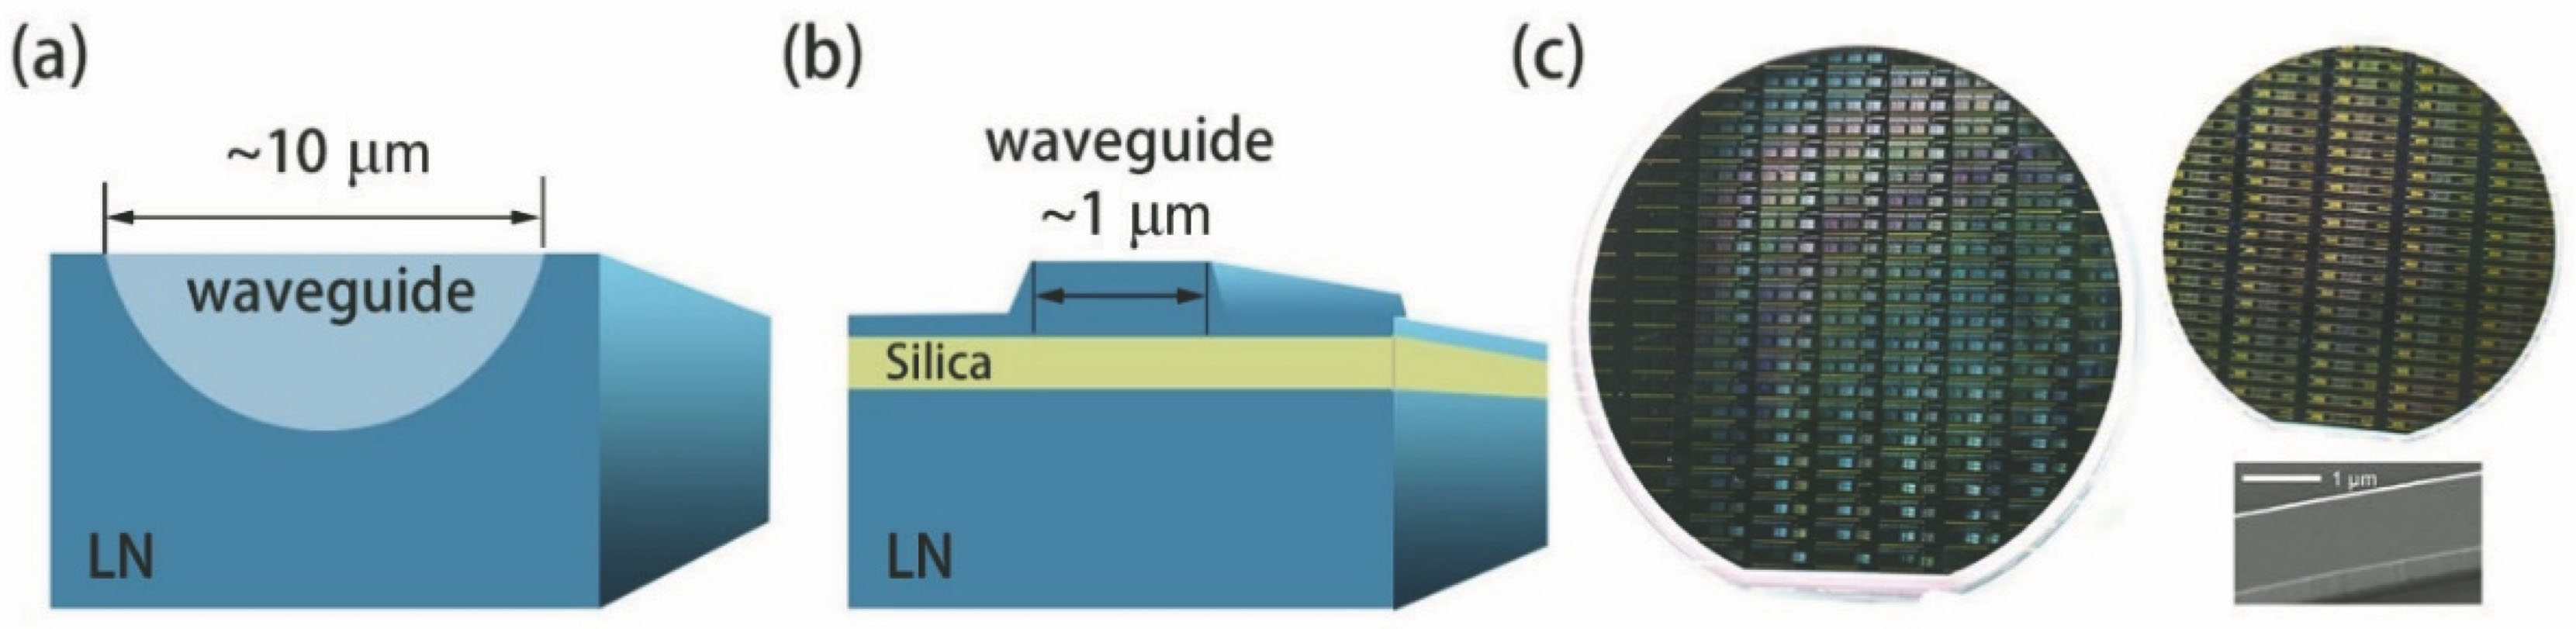 LN waveguides and integrated photonic chips. (a) Proton exchanged LN waveguide; (b) LNOI ridge waveguides; (c) scalar production of PIC on LNOI using ultraviolet lithography and dry etching[8]